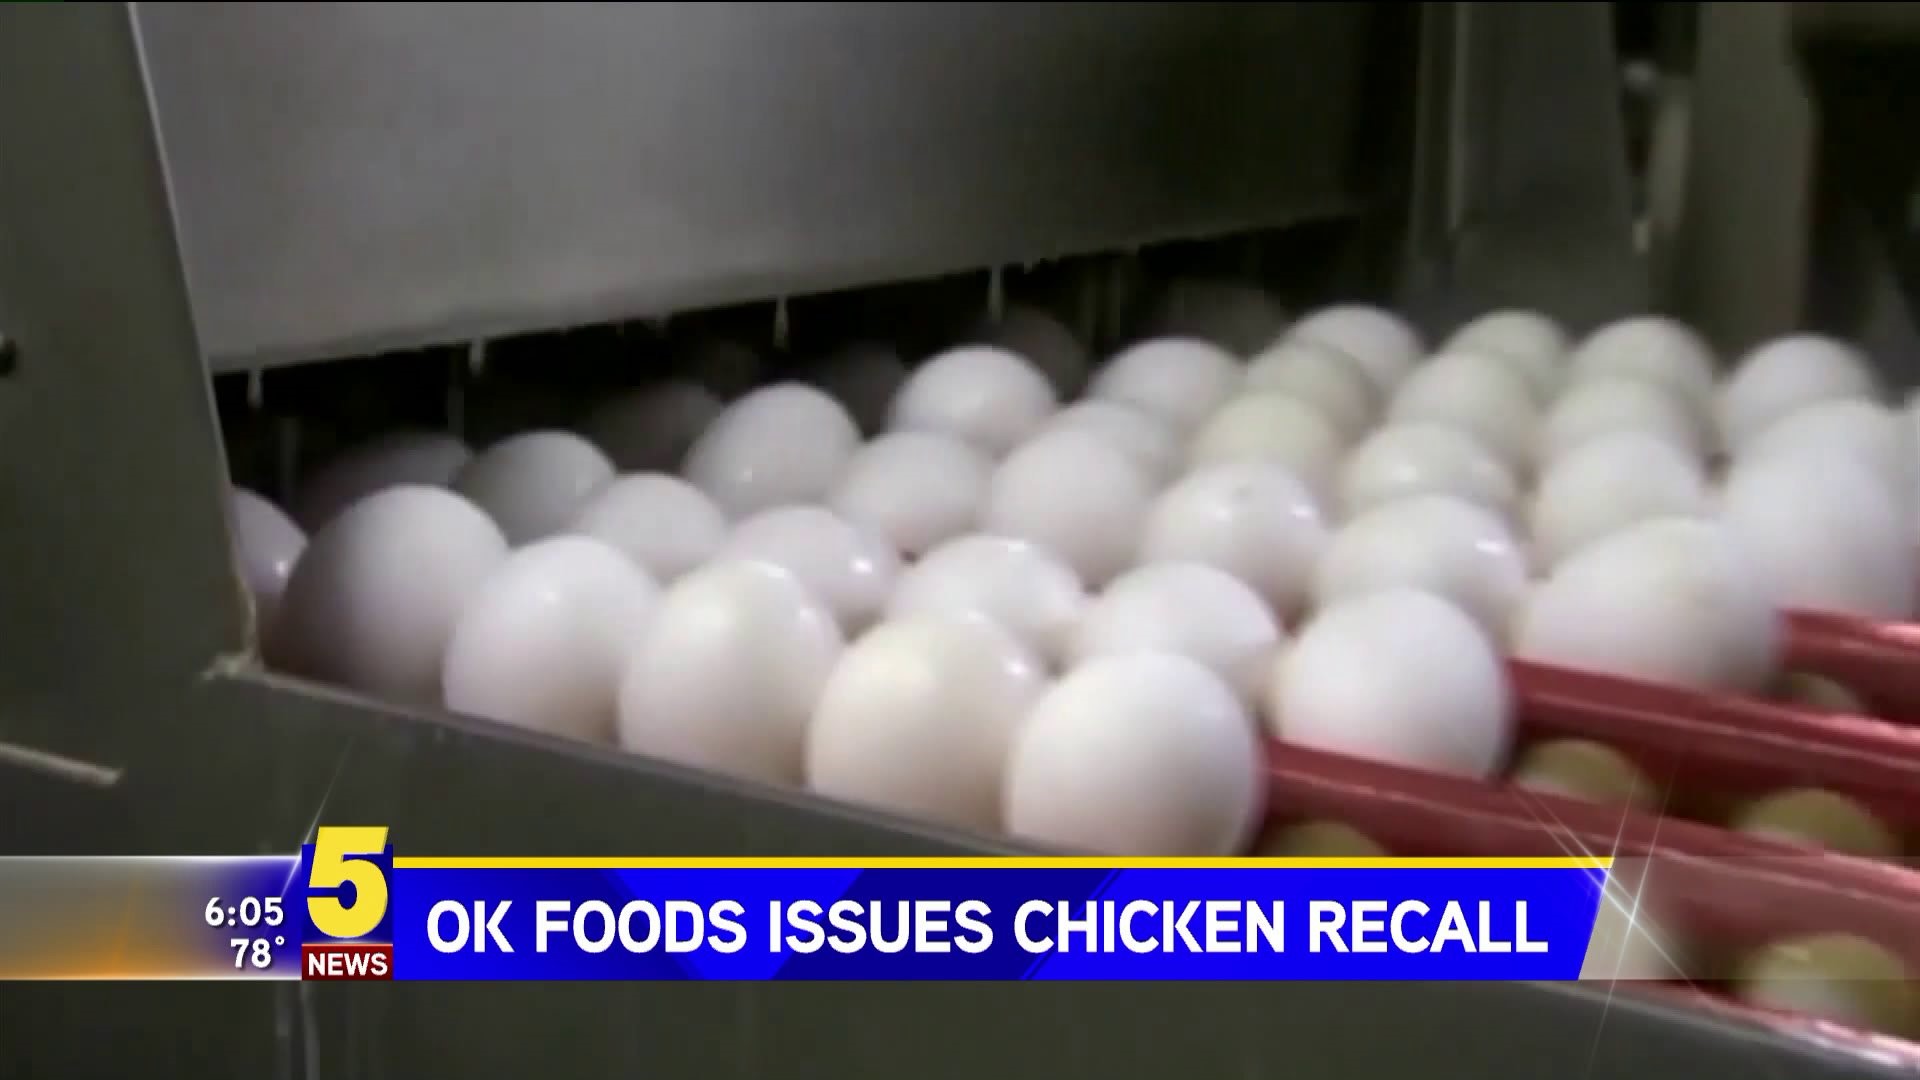 OK Foods Issues Chicken Recall